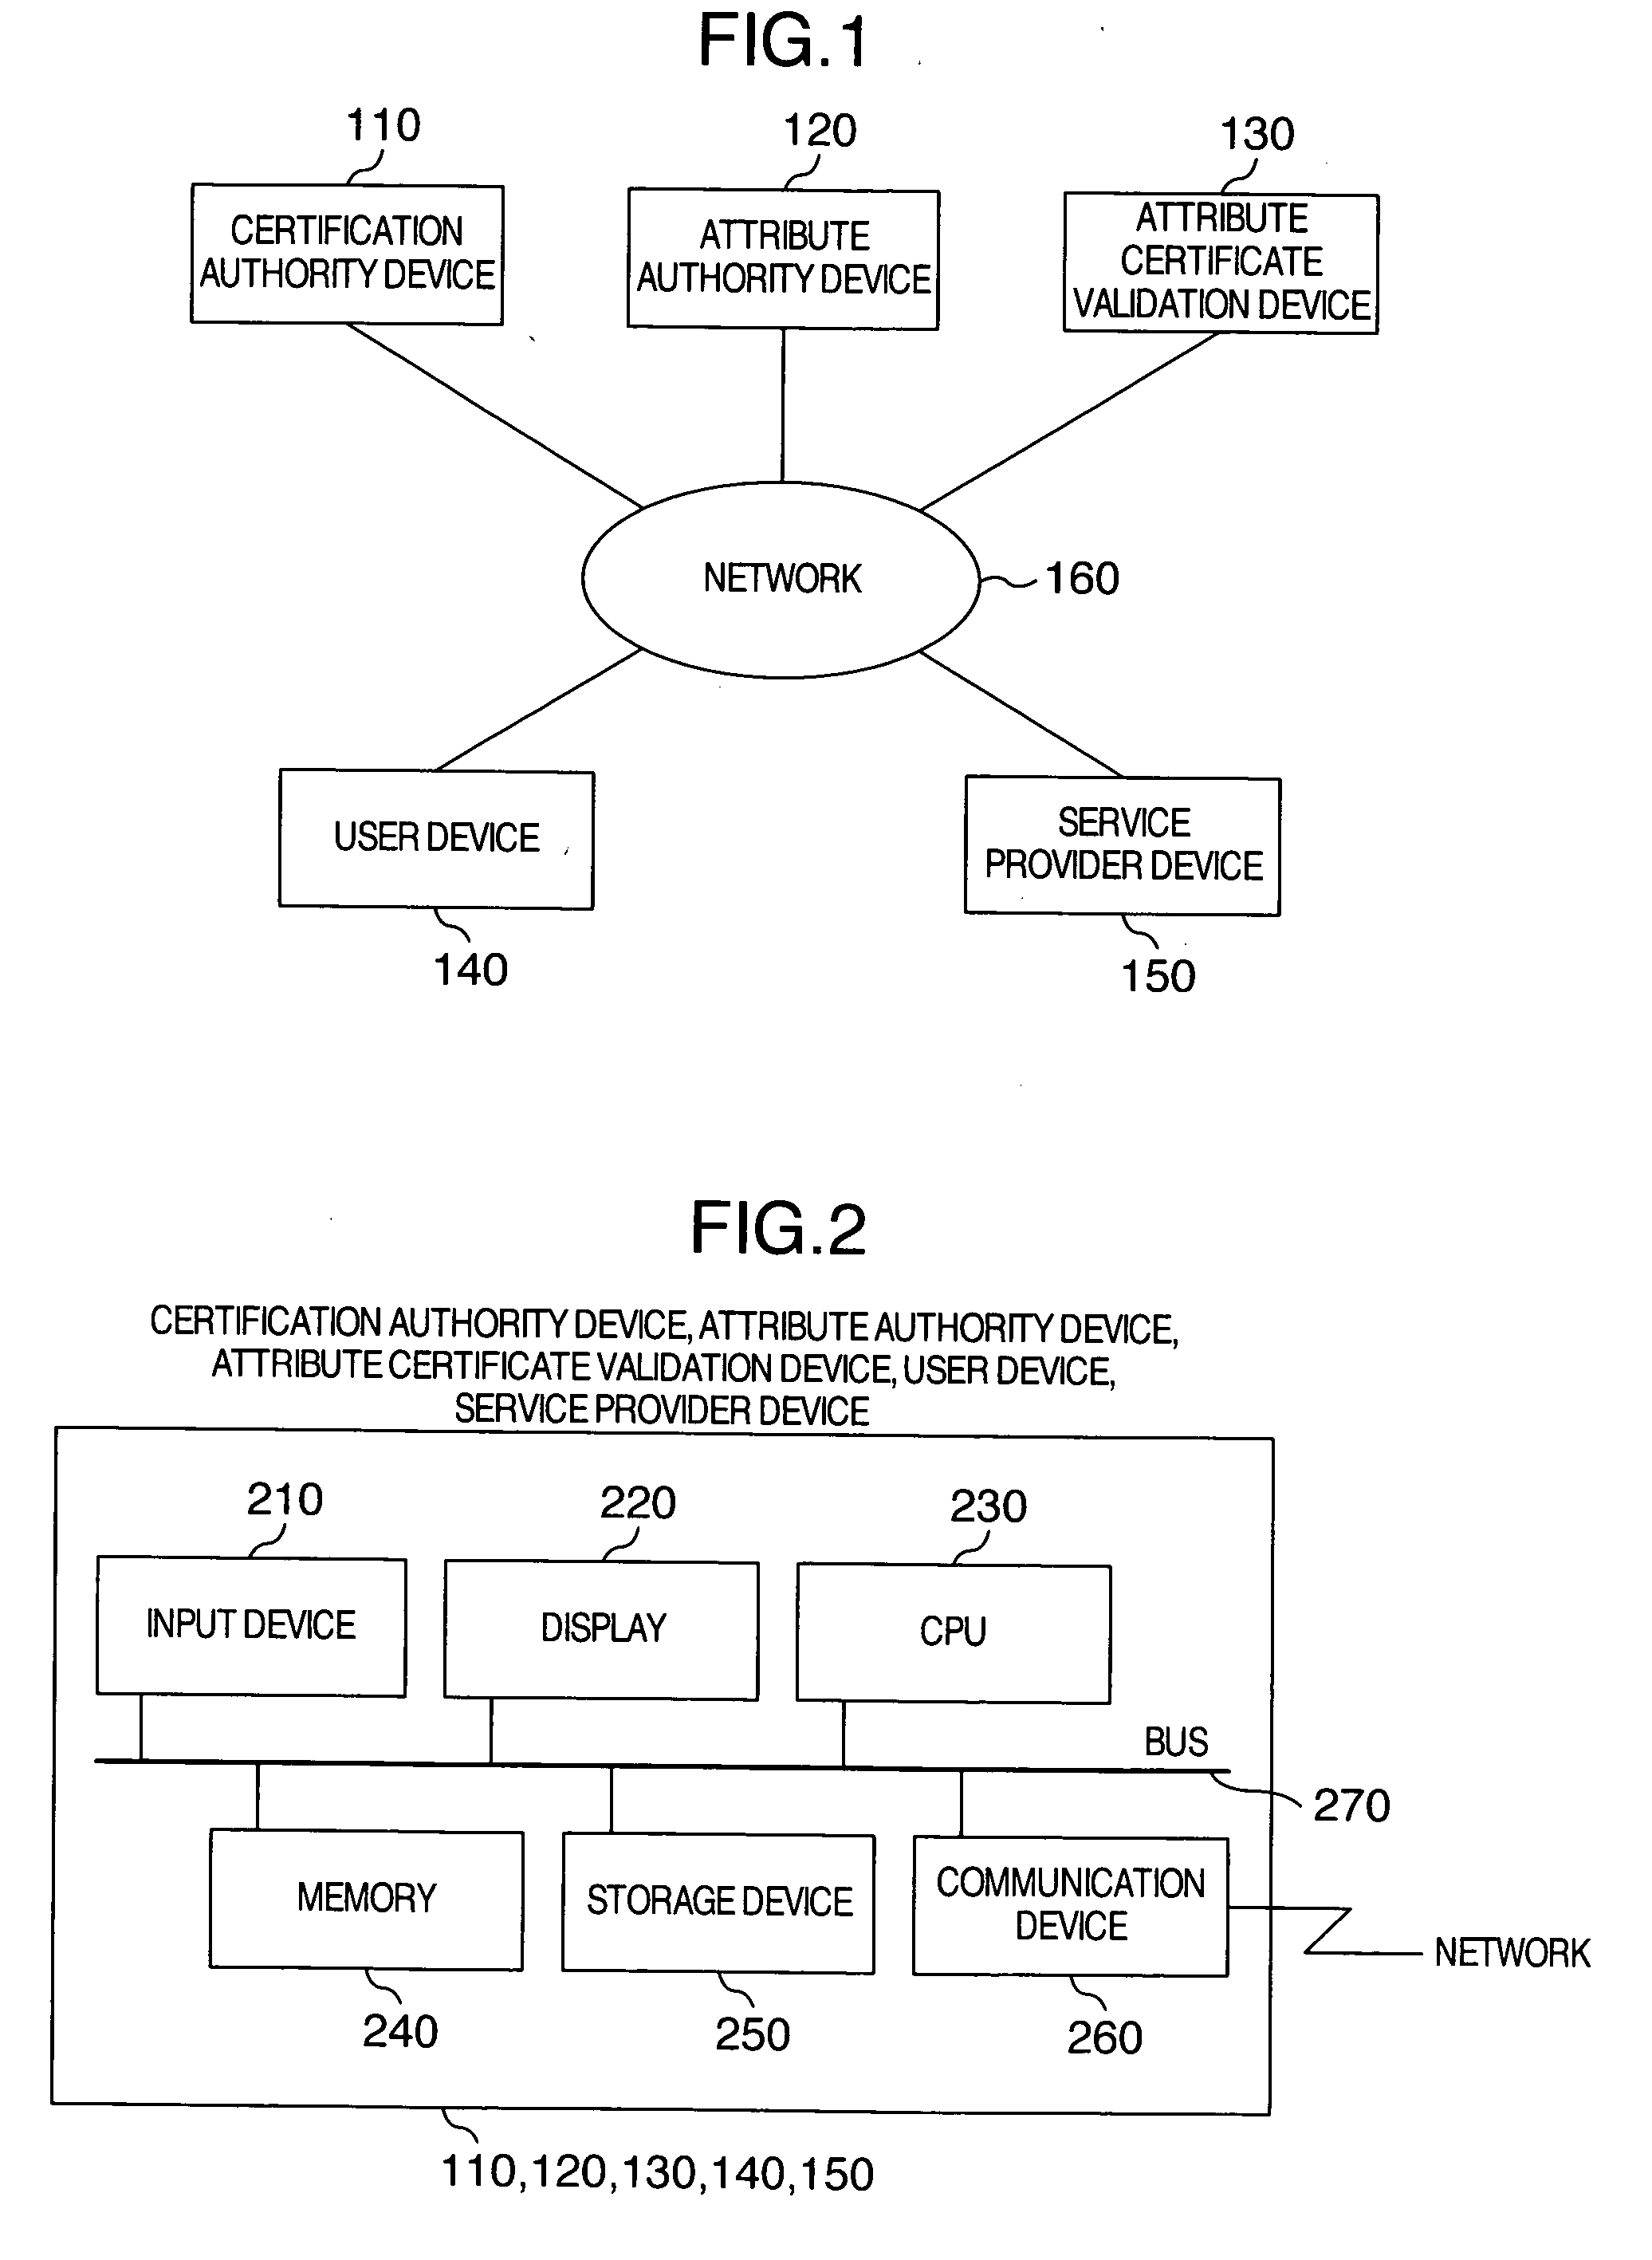 Attribute certificate validation method and device